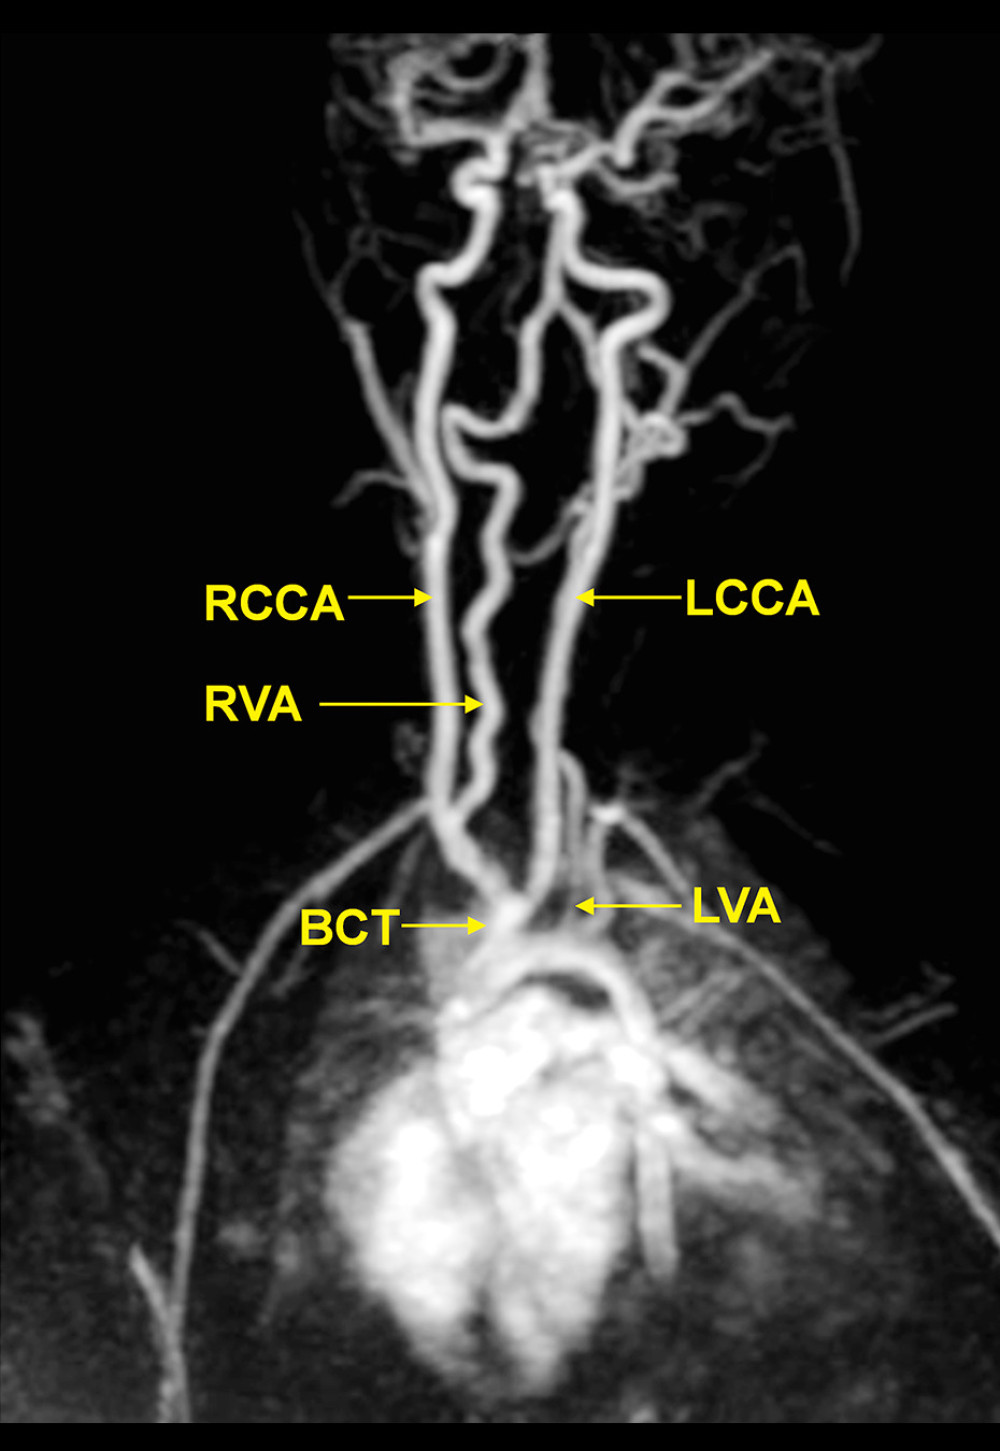 Magnetic resonance angiography demonstrates bovine type X aortic arch (Natsis classification). Origin of the right common carotid artery (RCCA) and left common carotid artery (LCCA) from the brachiocephalic trunk (BCT) and left vertebral artery (LVA) with origin in the aortic arch, not from the left subclavian artery.